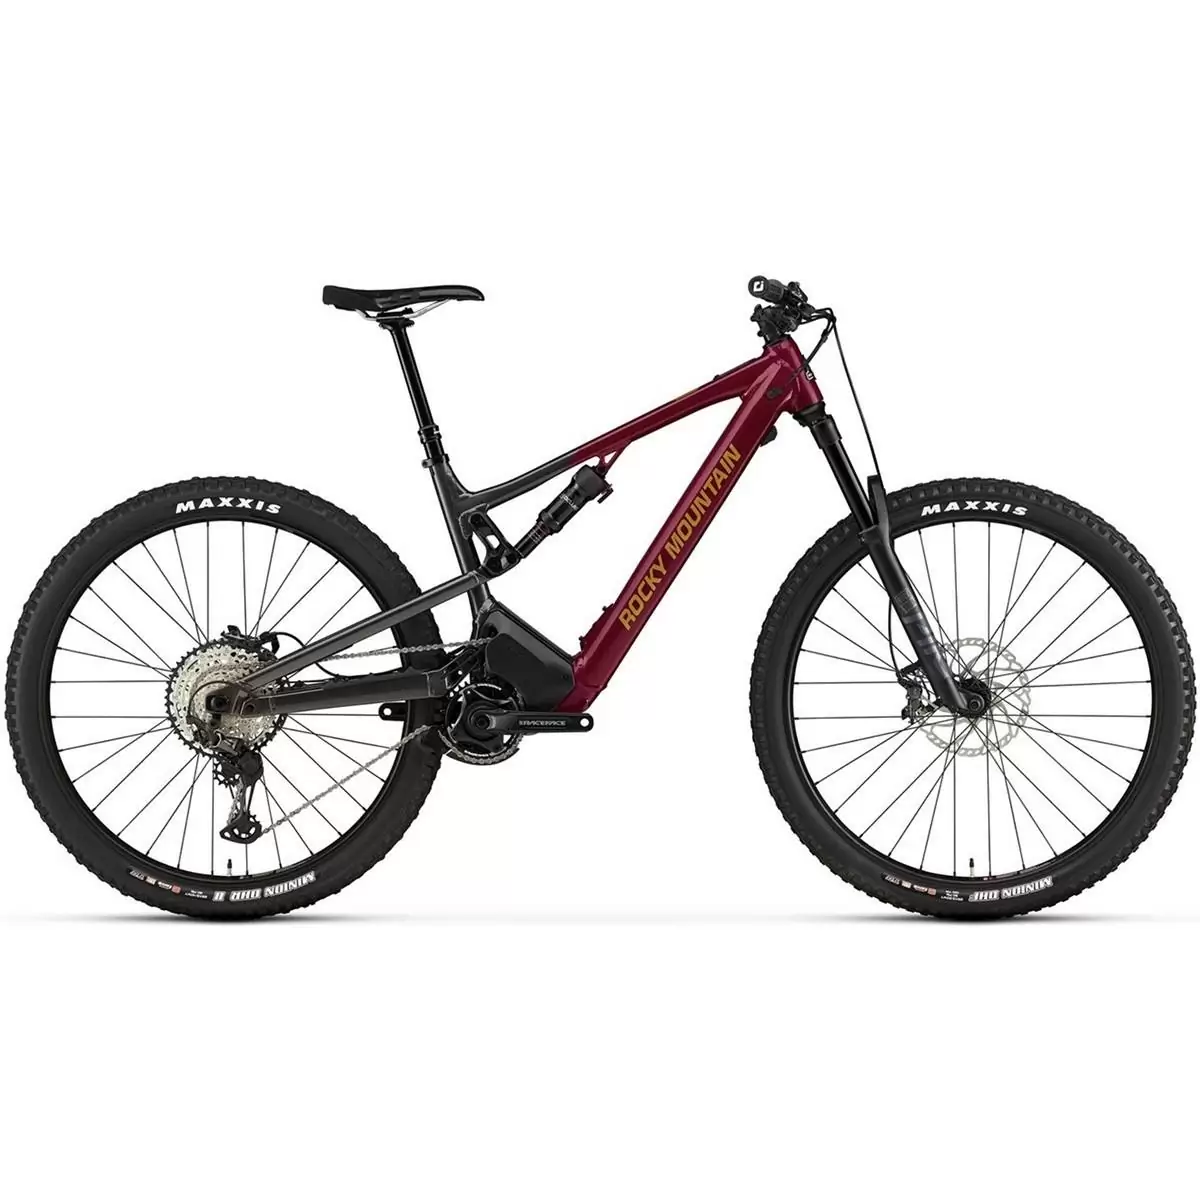 Instinct PowerPlay Alloy 70 29'' 150mm 12s 720Wh Grey/Red Size XL - image